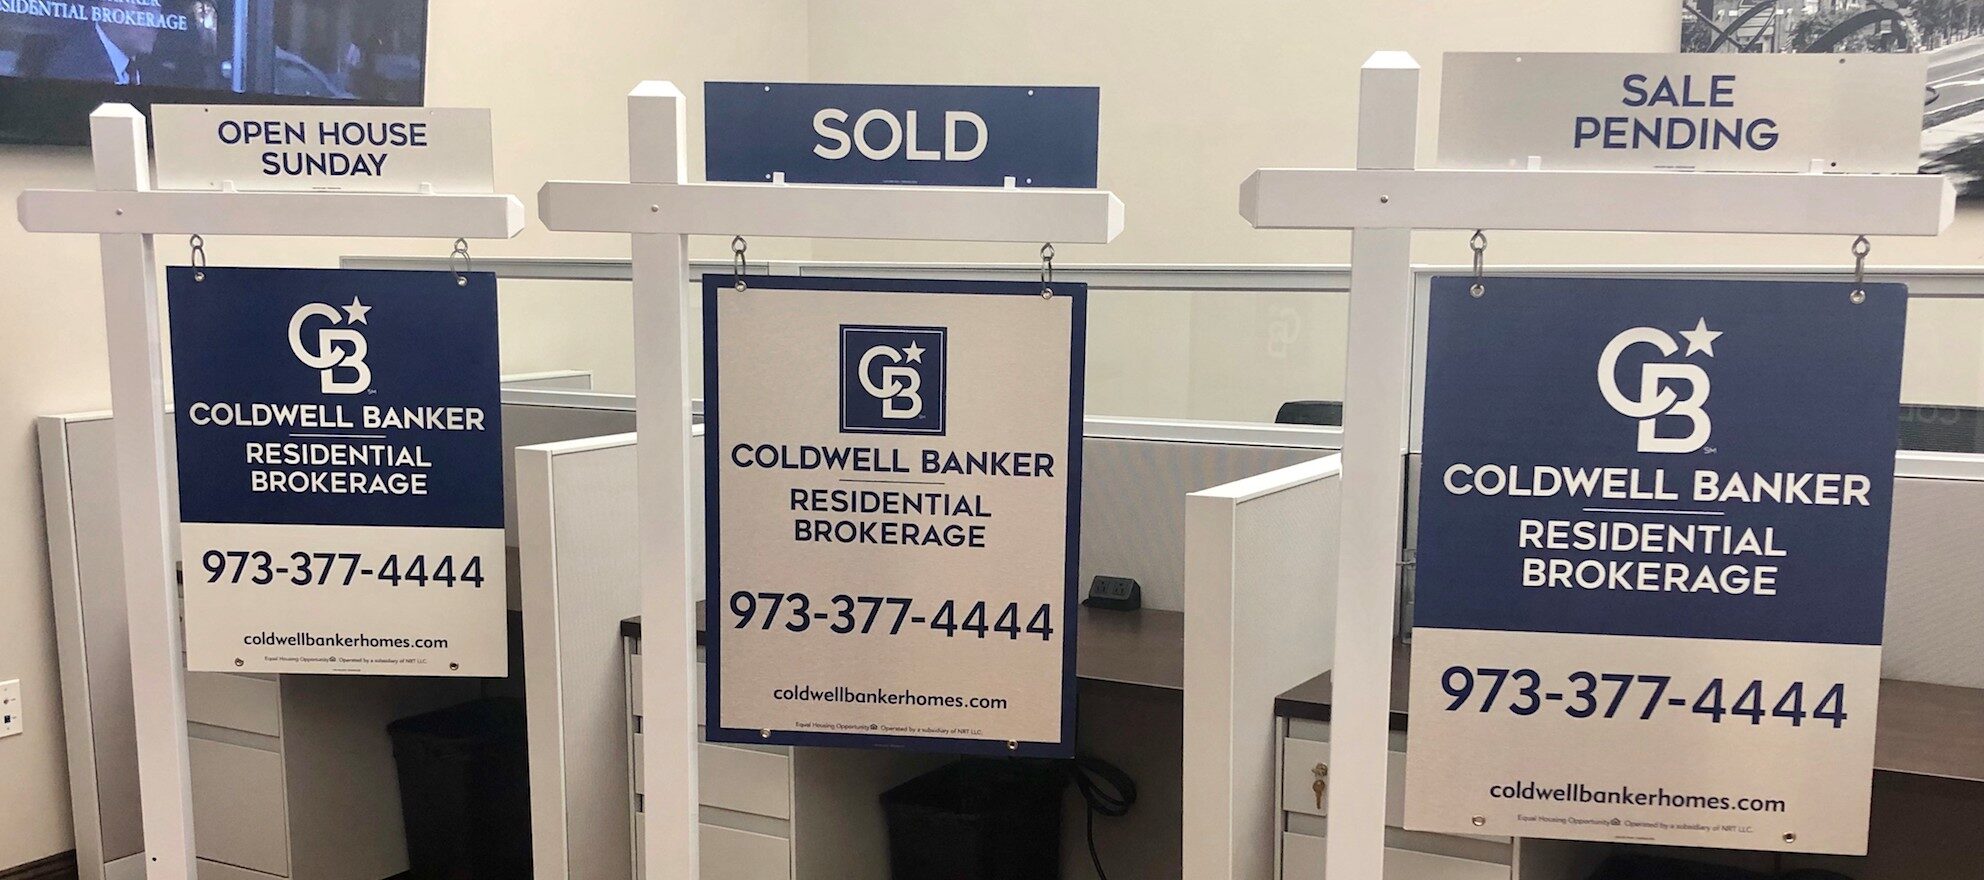 After 40 years, Coldwell Banker begins rolling out a new logo and branding